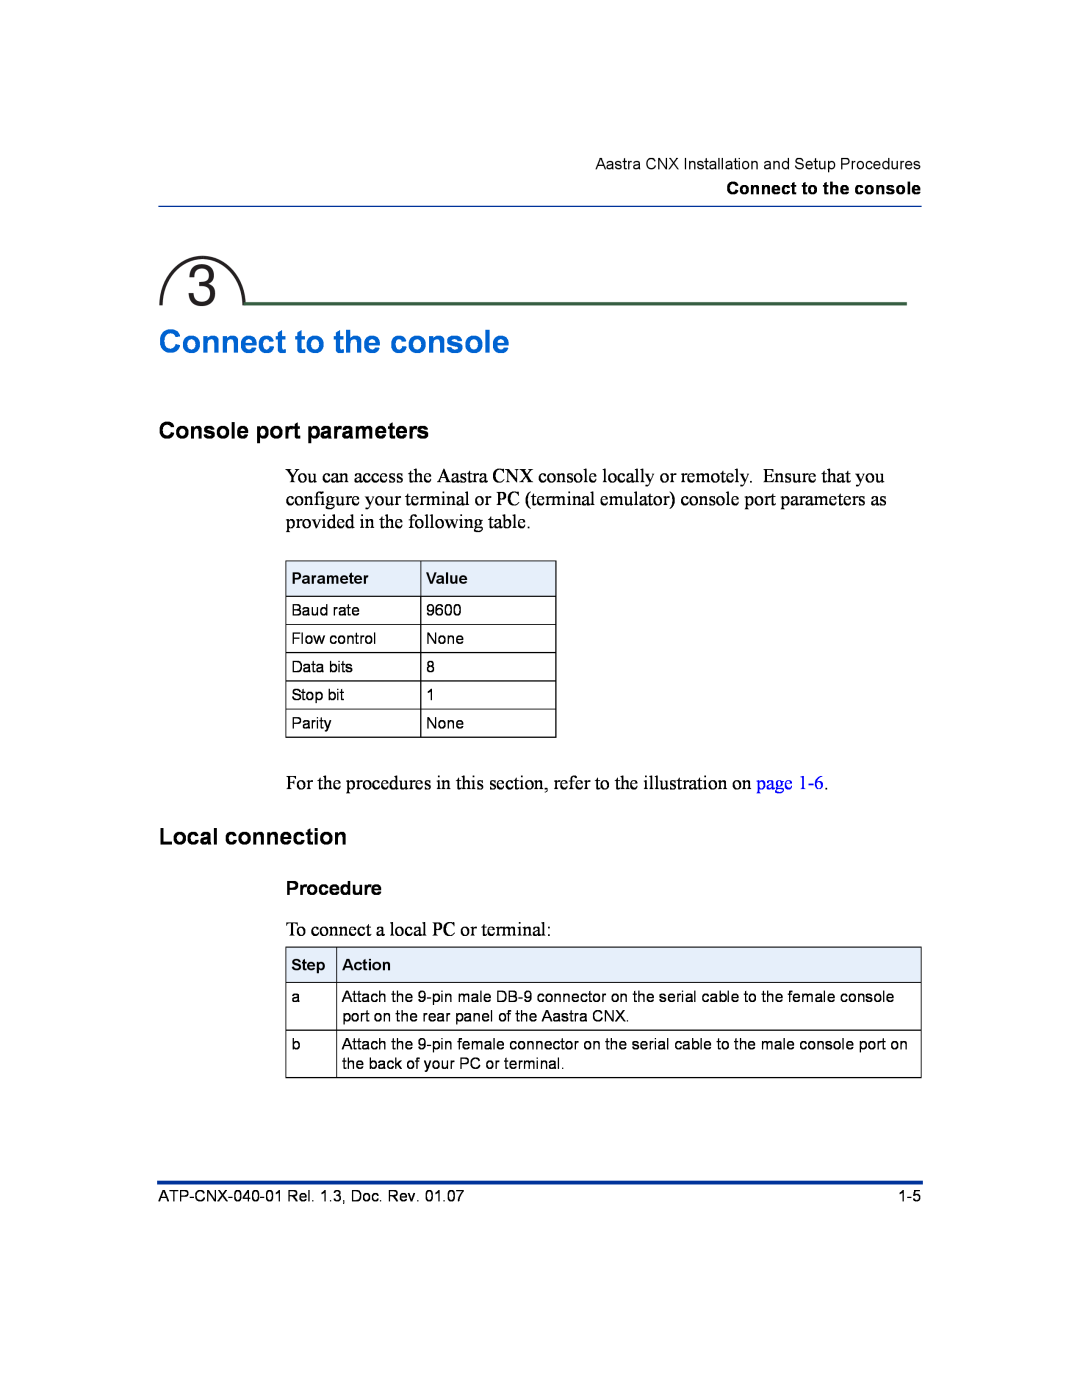 Aastra Telecom ATP-CNX-040-01 manual Connect to the console, Console port parameters, Local connection, Procedure 